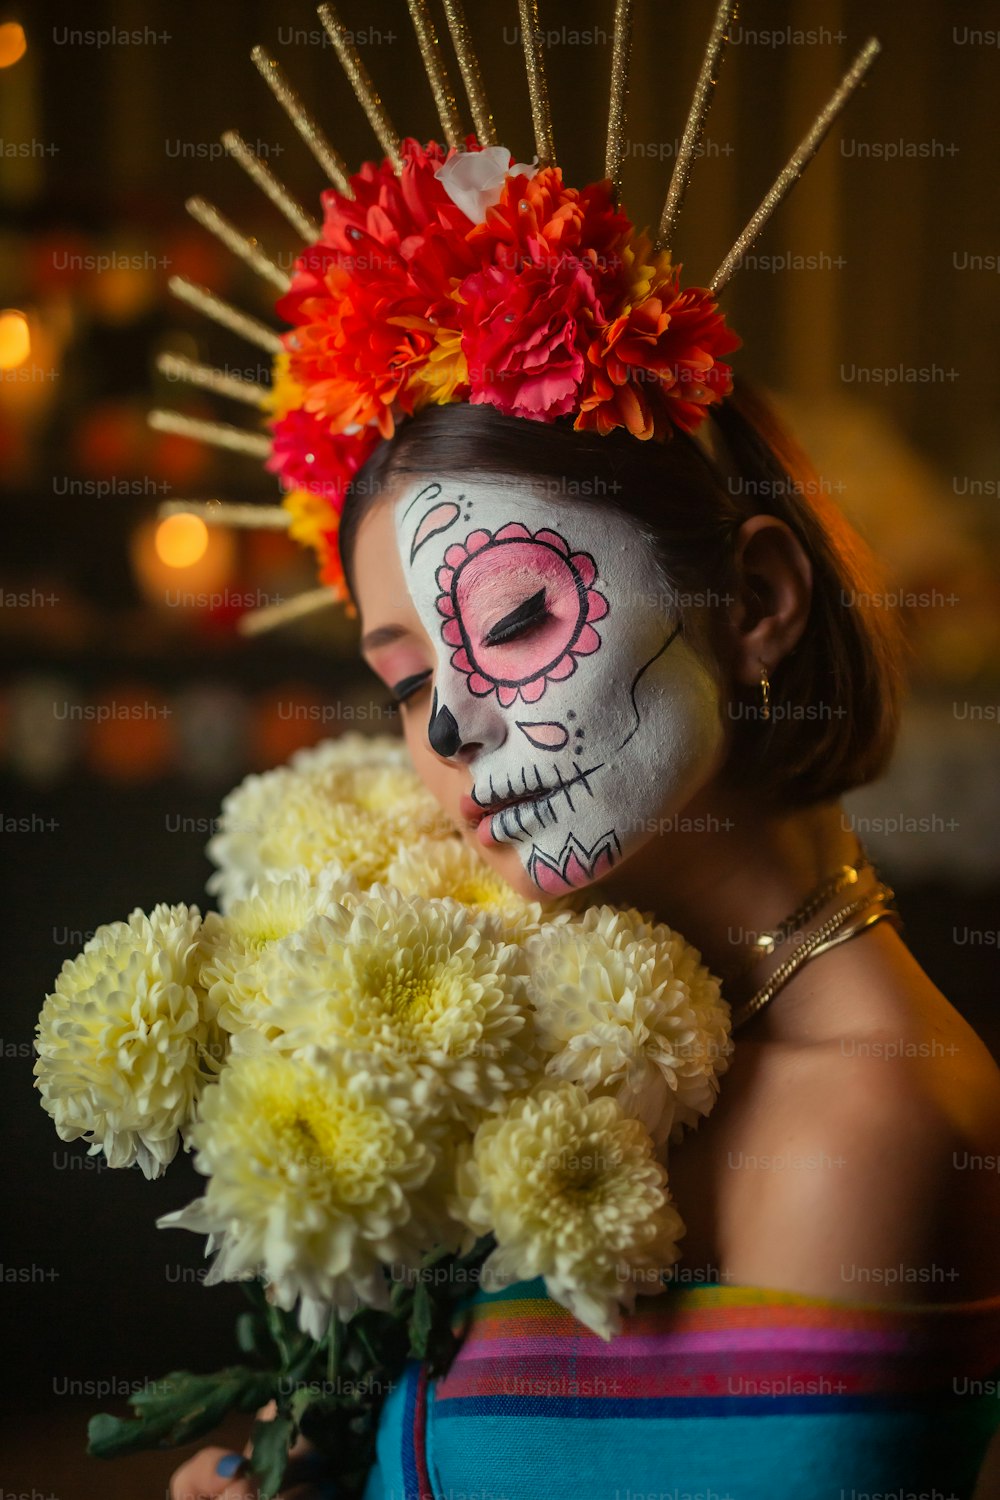 a woman with a skull painted on her face holding a bouquet of flowers